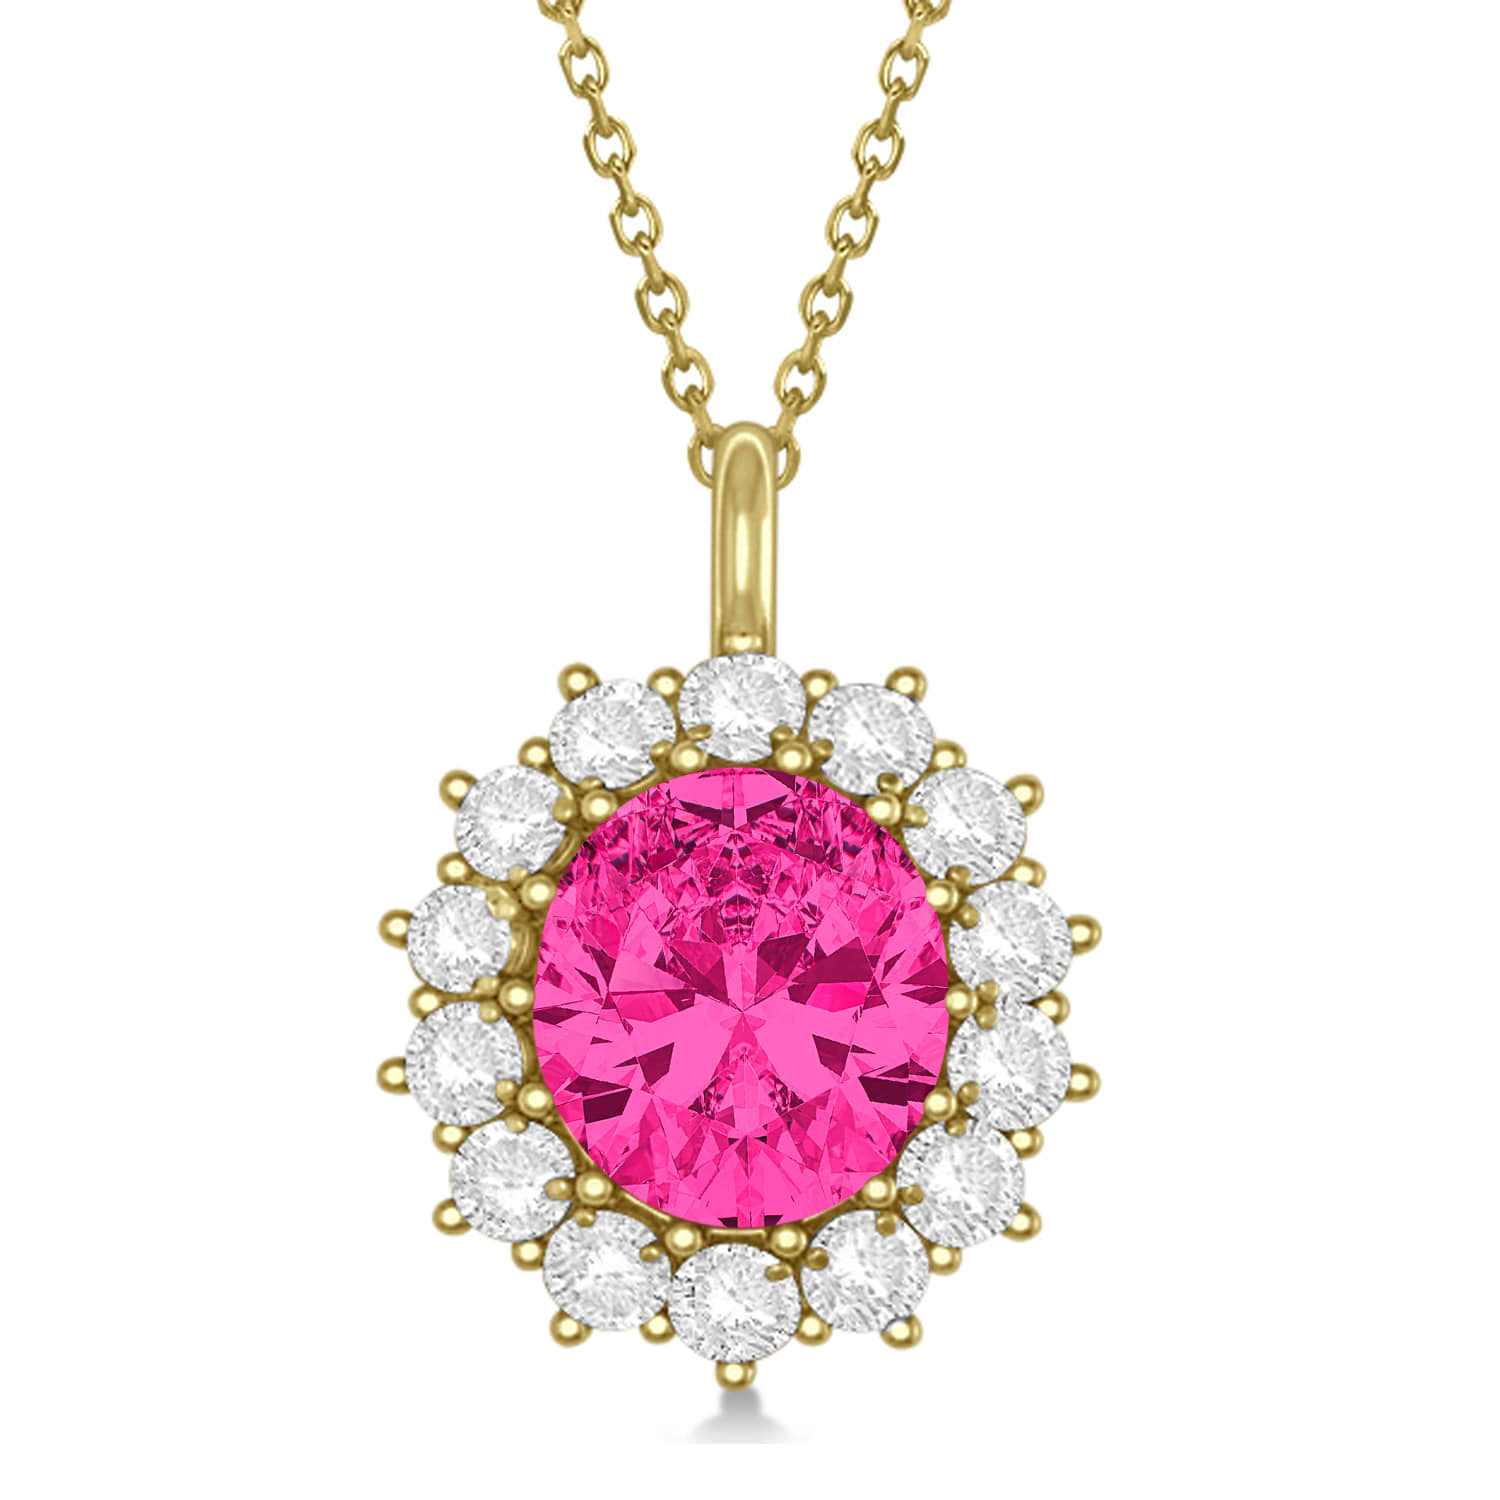 Oval Pink Tourmaline and Diamond Pendant Necklace 14k Yellow Gold (5.40ctw)